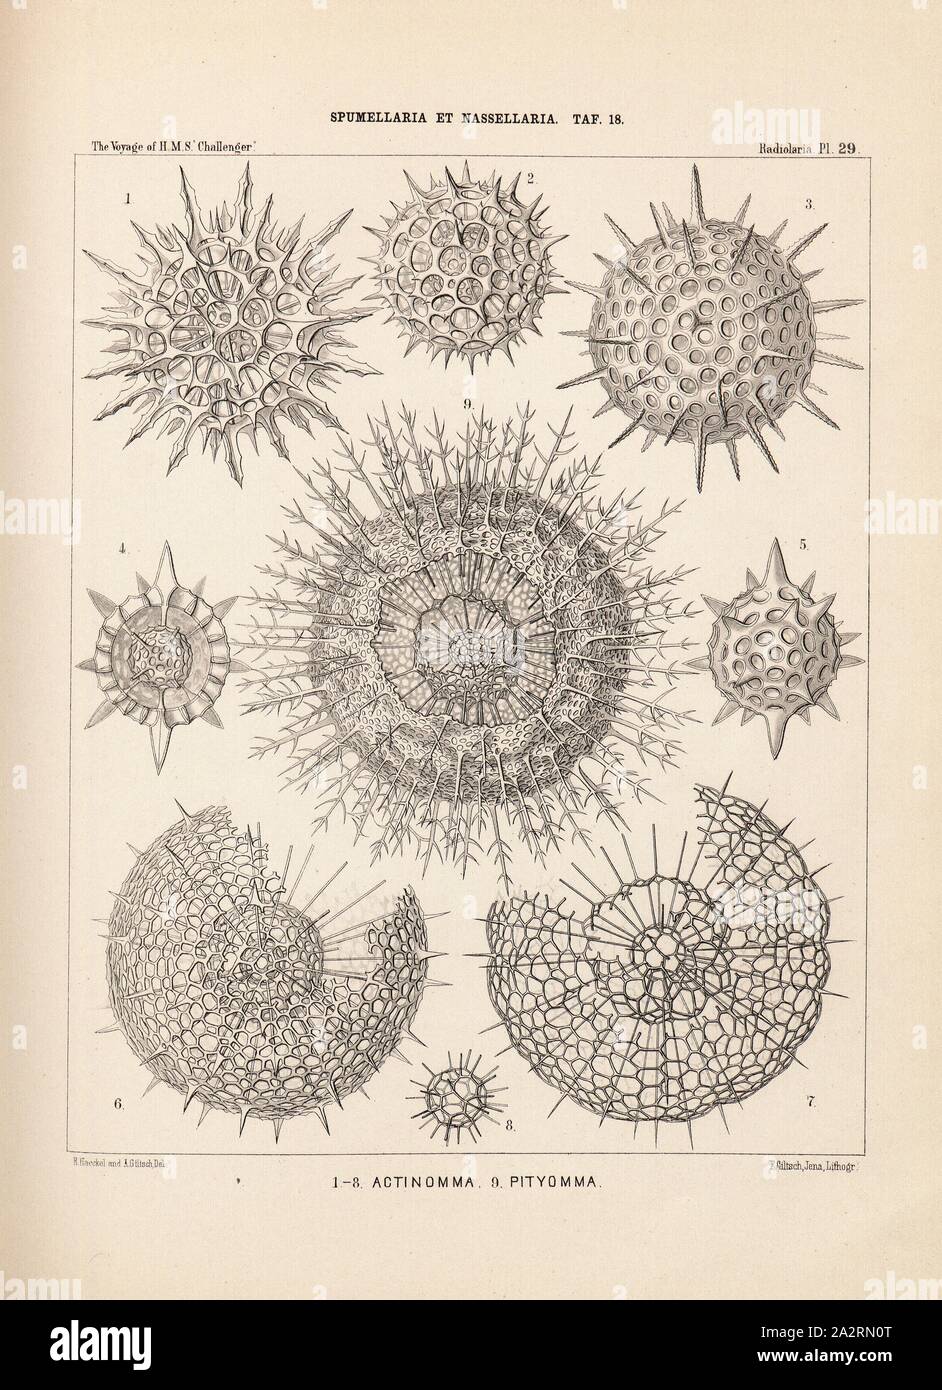 Actinomma, Pityomma, Illustration of various radiolarians of the Spumellaria and Nassellaria groups from the 19th century, signed: E. Haeckel and A. Giltsch Del, F. Giltsch, Jena, Lithogr, Pl. 29, after p. 248, Haeckel, Ernst (del.); Giltsch, A. (del.); Giltsch, F. (lith.); Jena (lith.), 1862, Ernst Haeckel: Die Radiolarien (Rhizopoda Radiaria). Zweiter Theil. Berlin: Verlag von Georg Reimer, 1862 Stock Photo